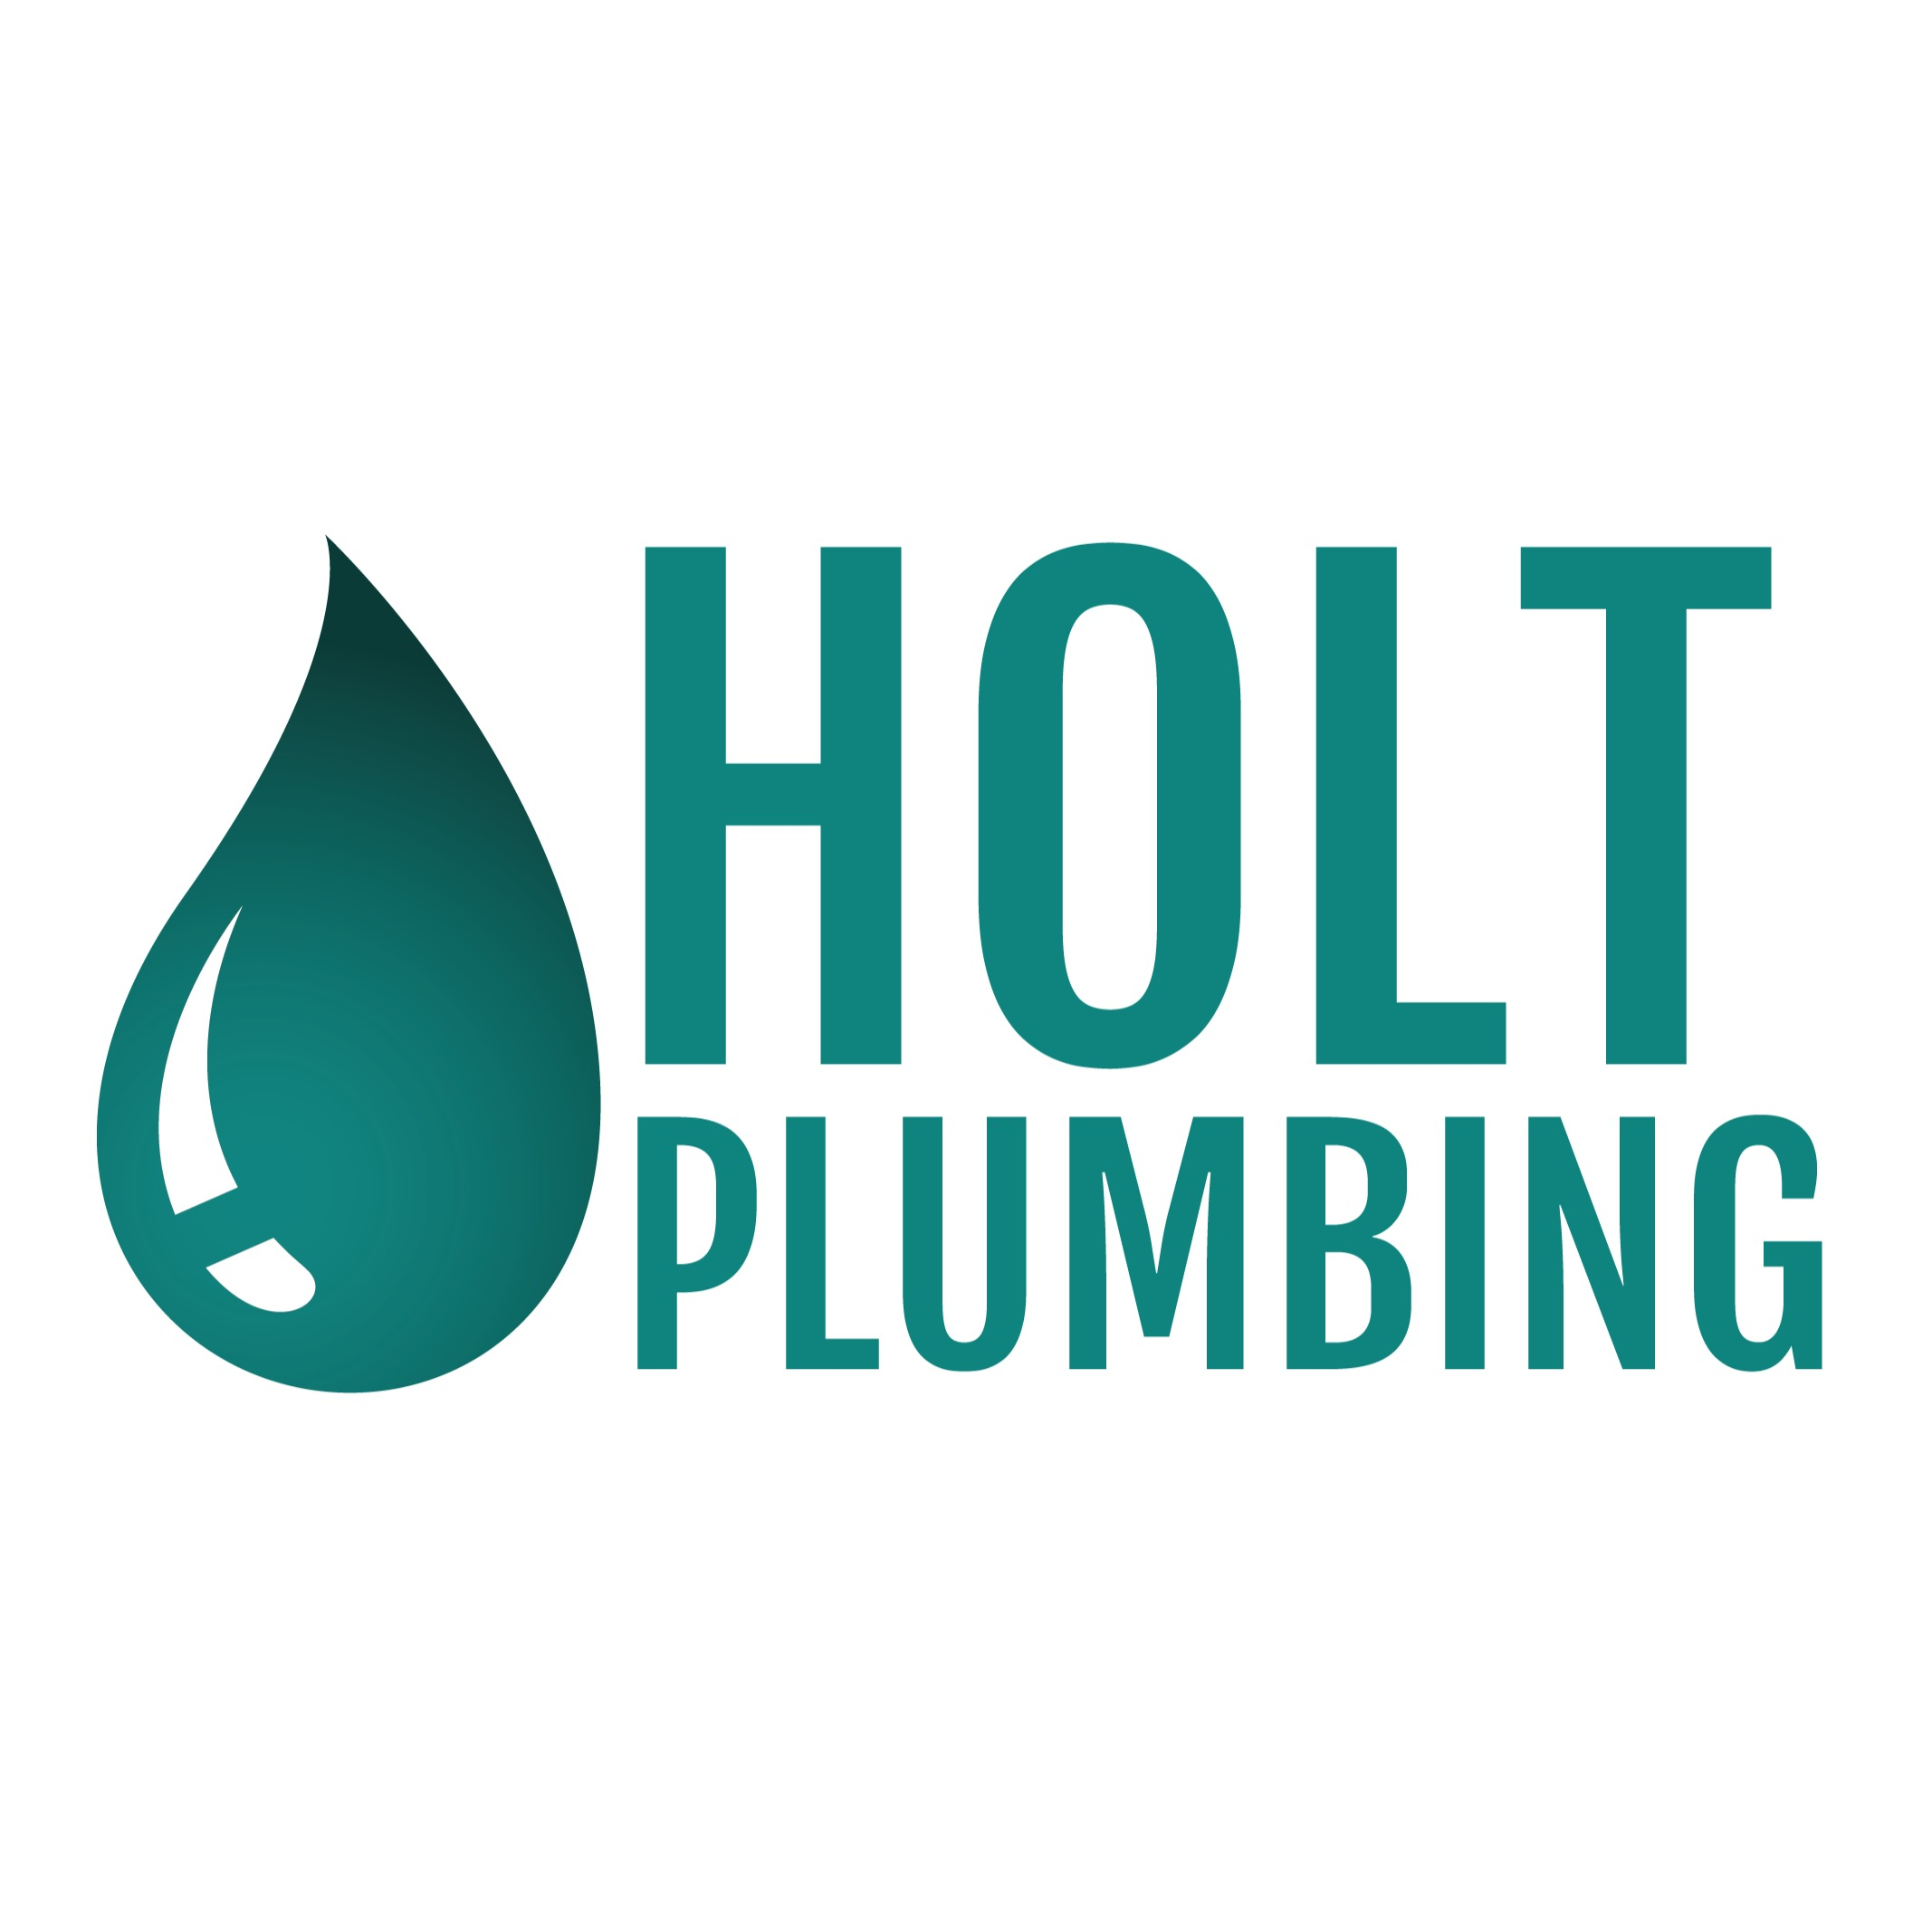 Holt Plumbing - Cooroy, QLD - (07) 5221 9050 | ShowMeLocal.com